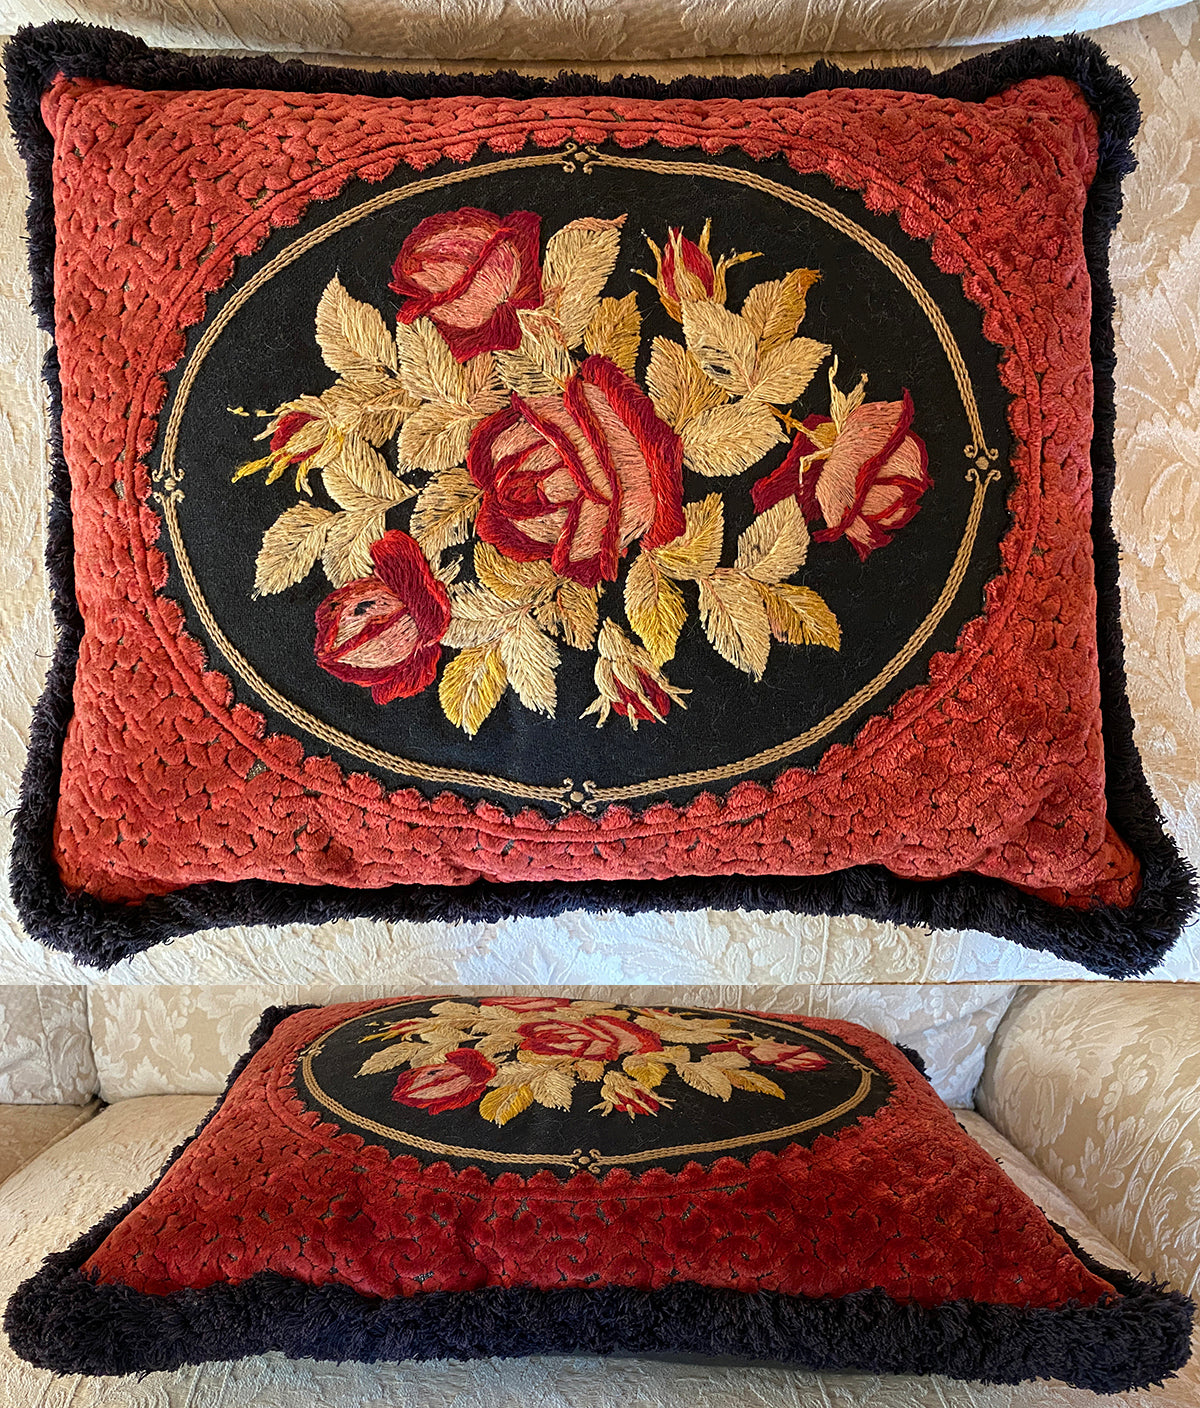 Antique Victorian Long-stitch Wool Embroidery, Needlework Panel Made into Throw Pillow 20" x 16"